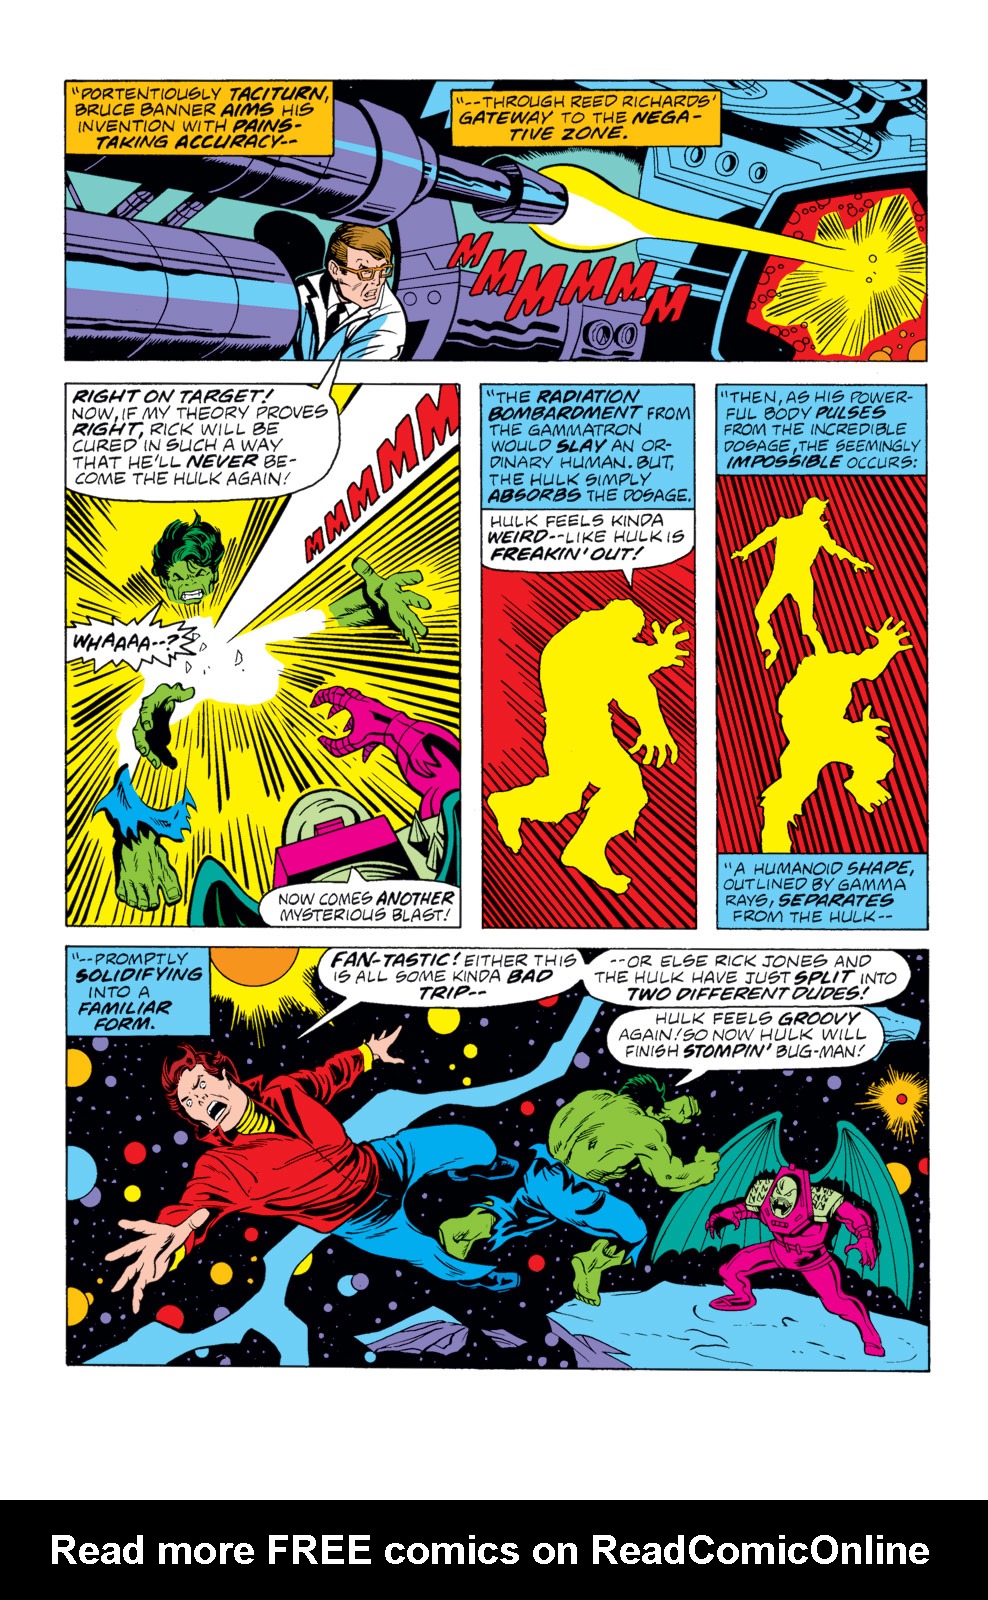 What If? (1977) issue 12 - Rick Jones had become the Hulk - Page 27